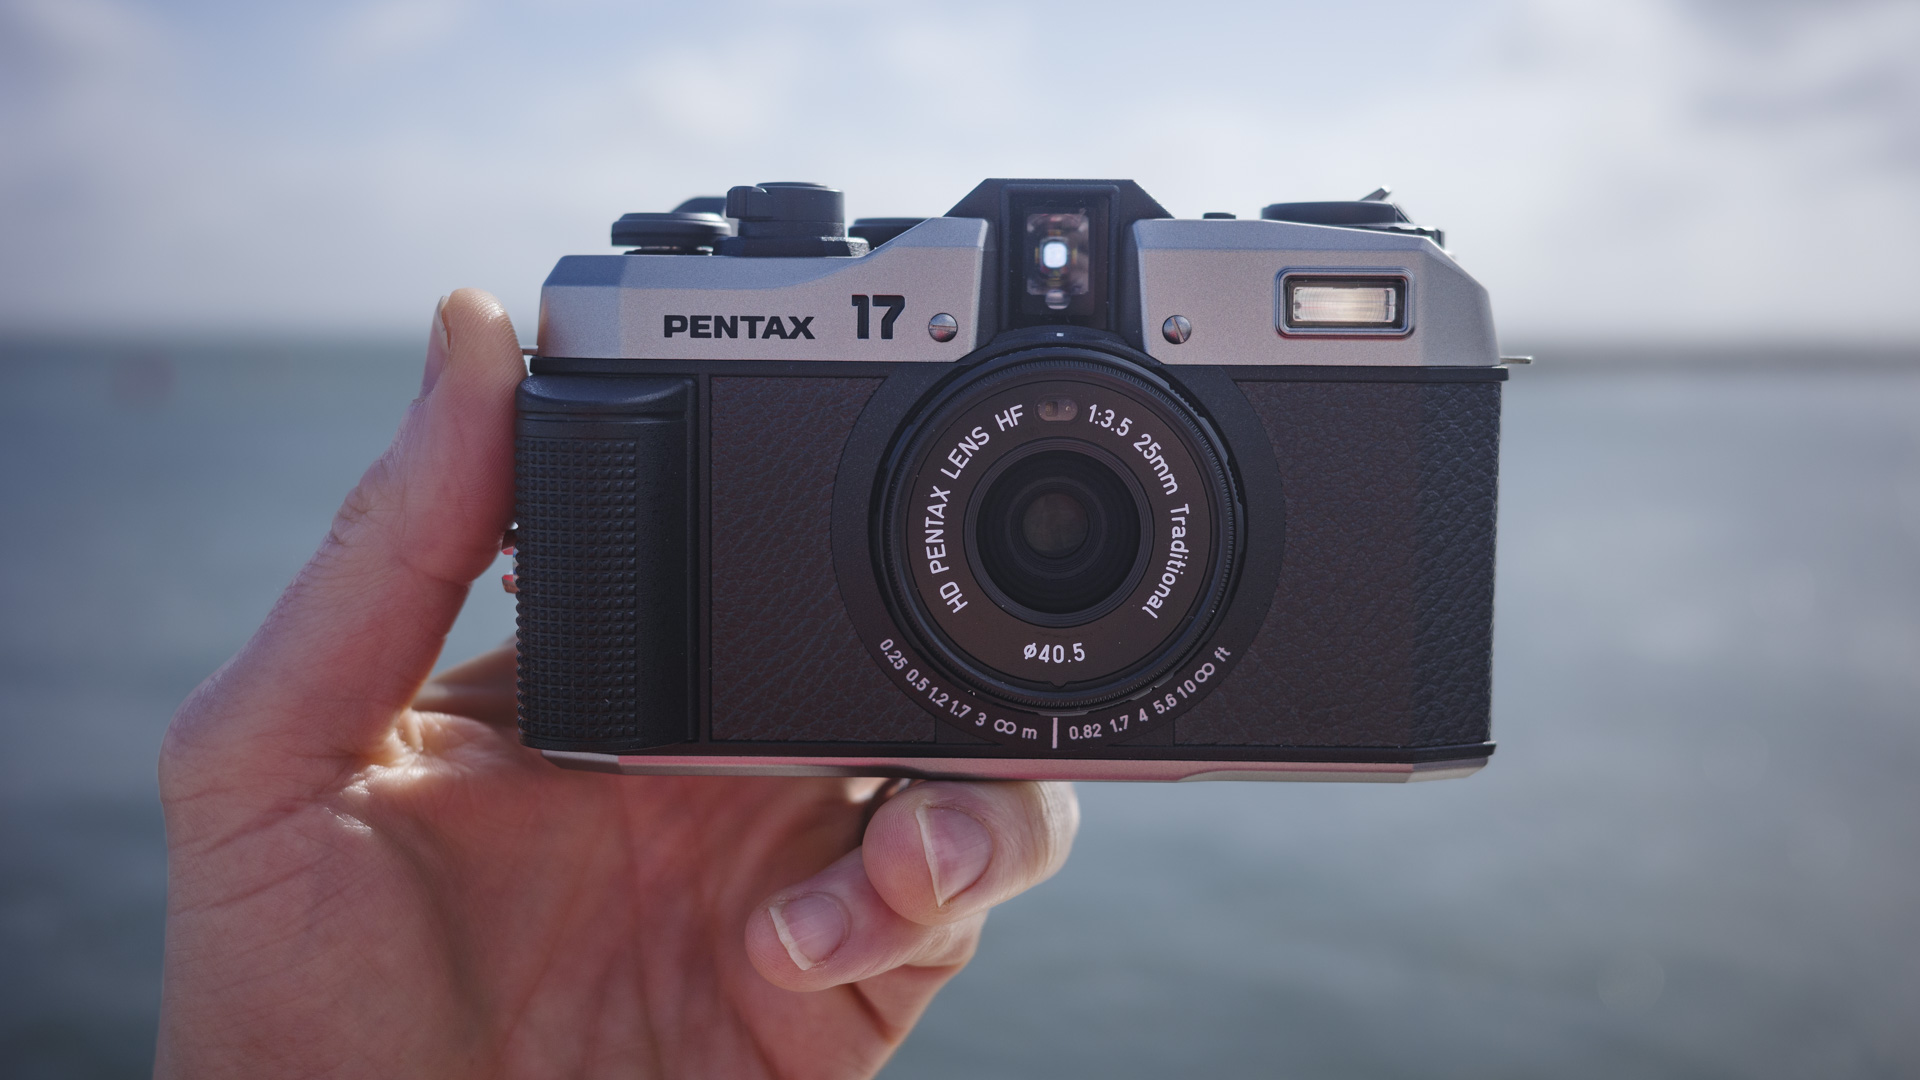 Pentax 17 compact film camera  front-on, in the hand  with ocean backdrop